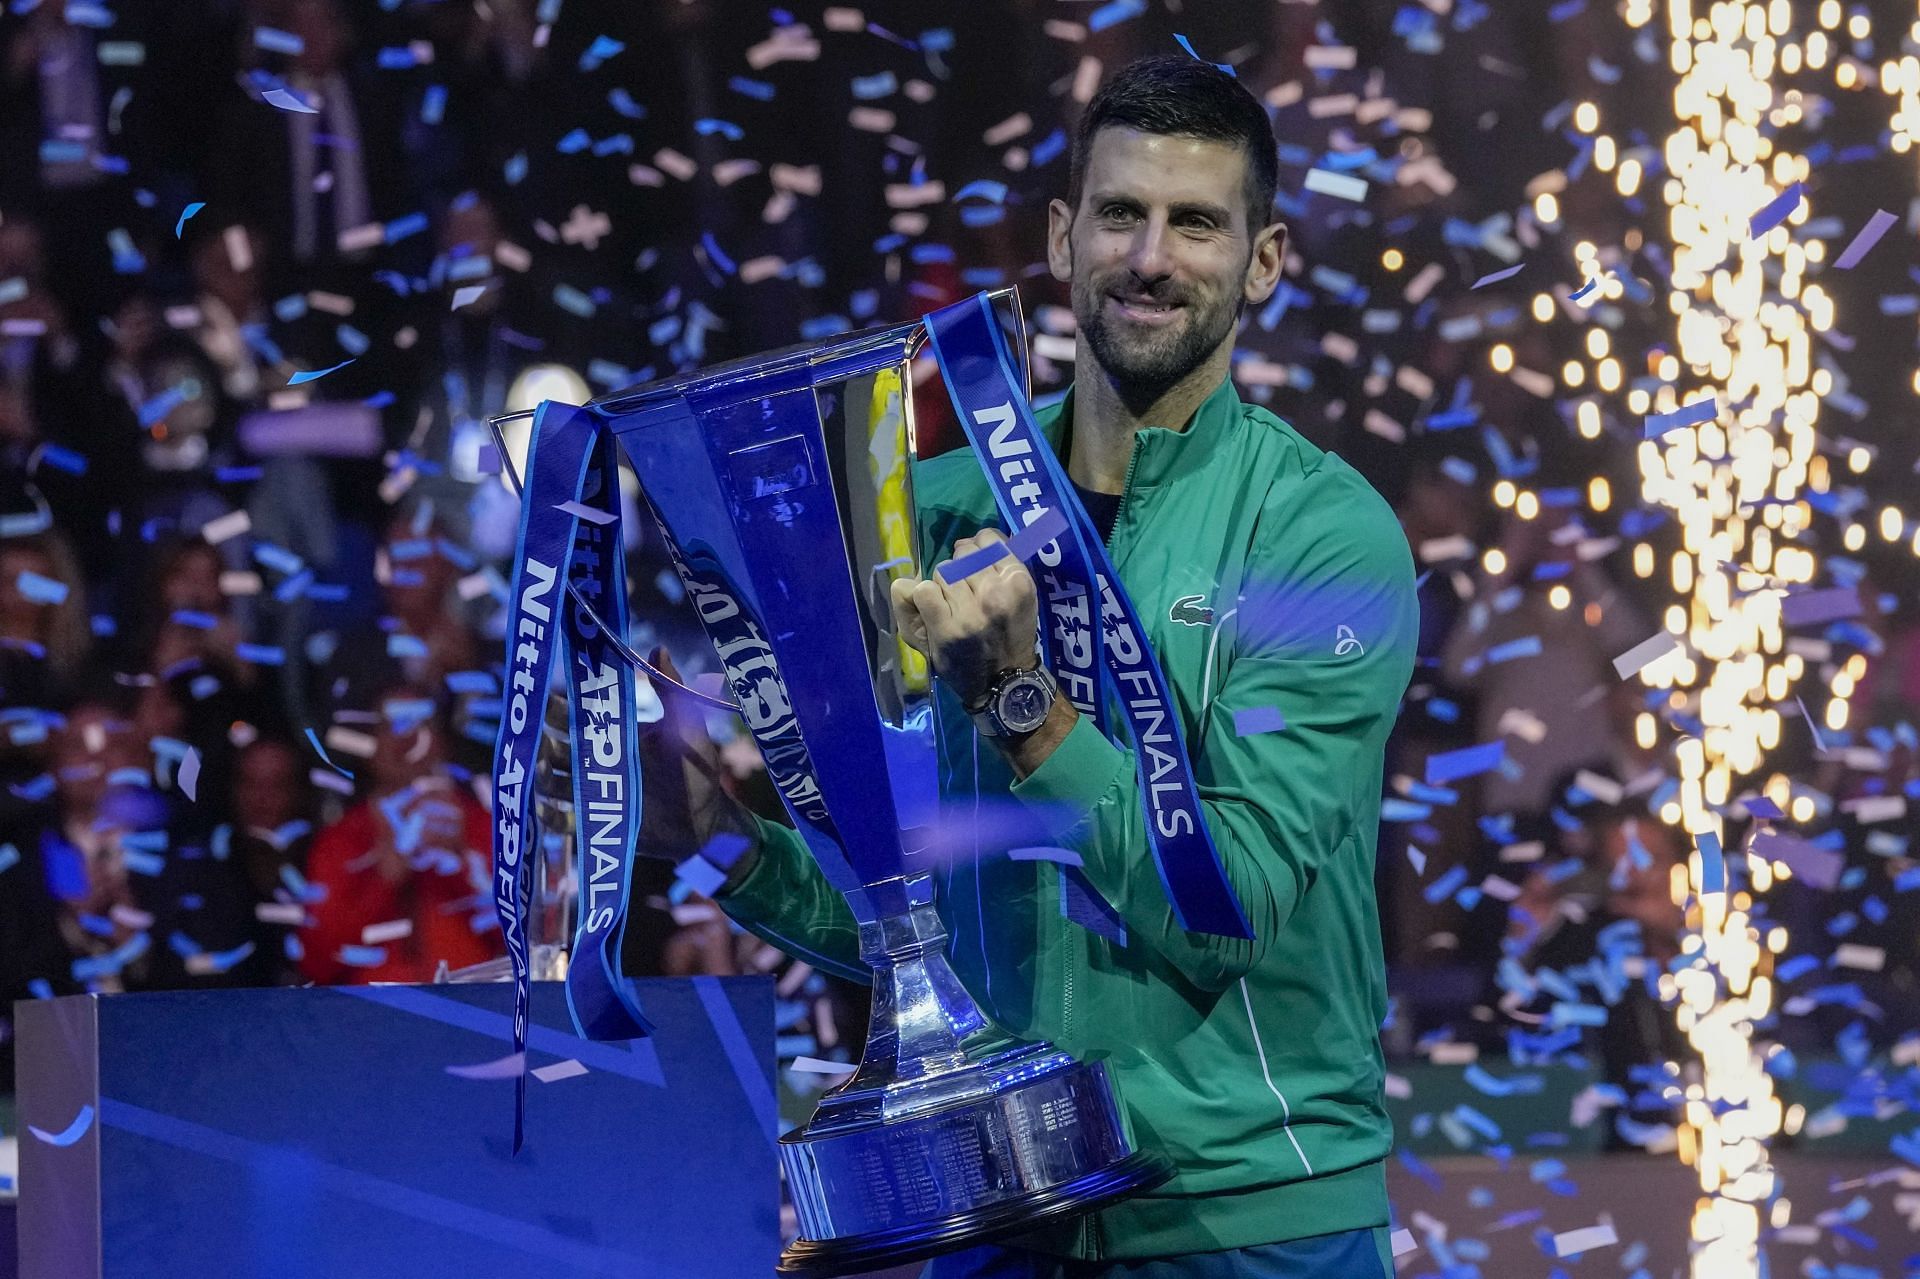 Novak Djokovic with his 7th ATP Finals title